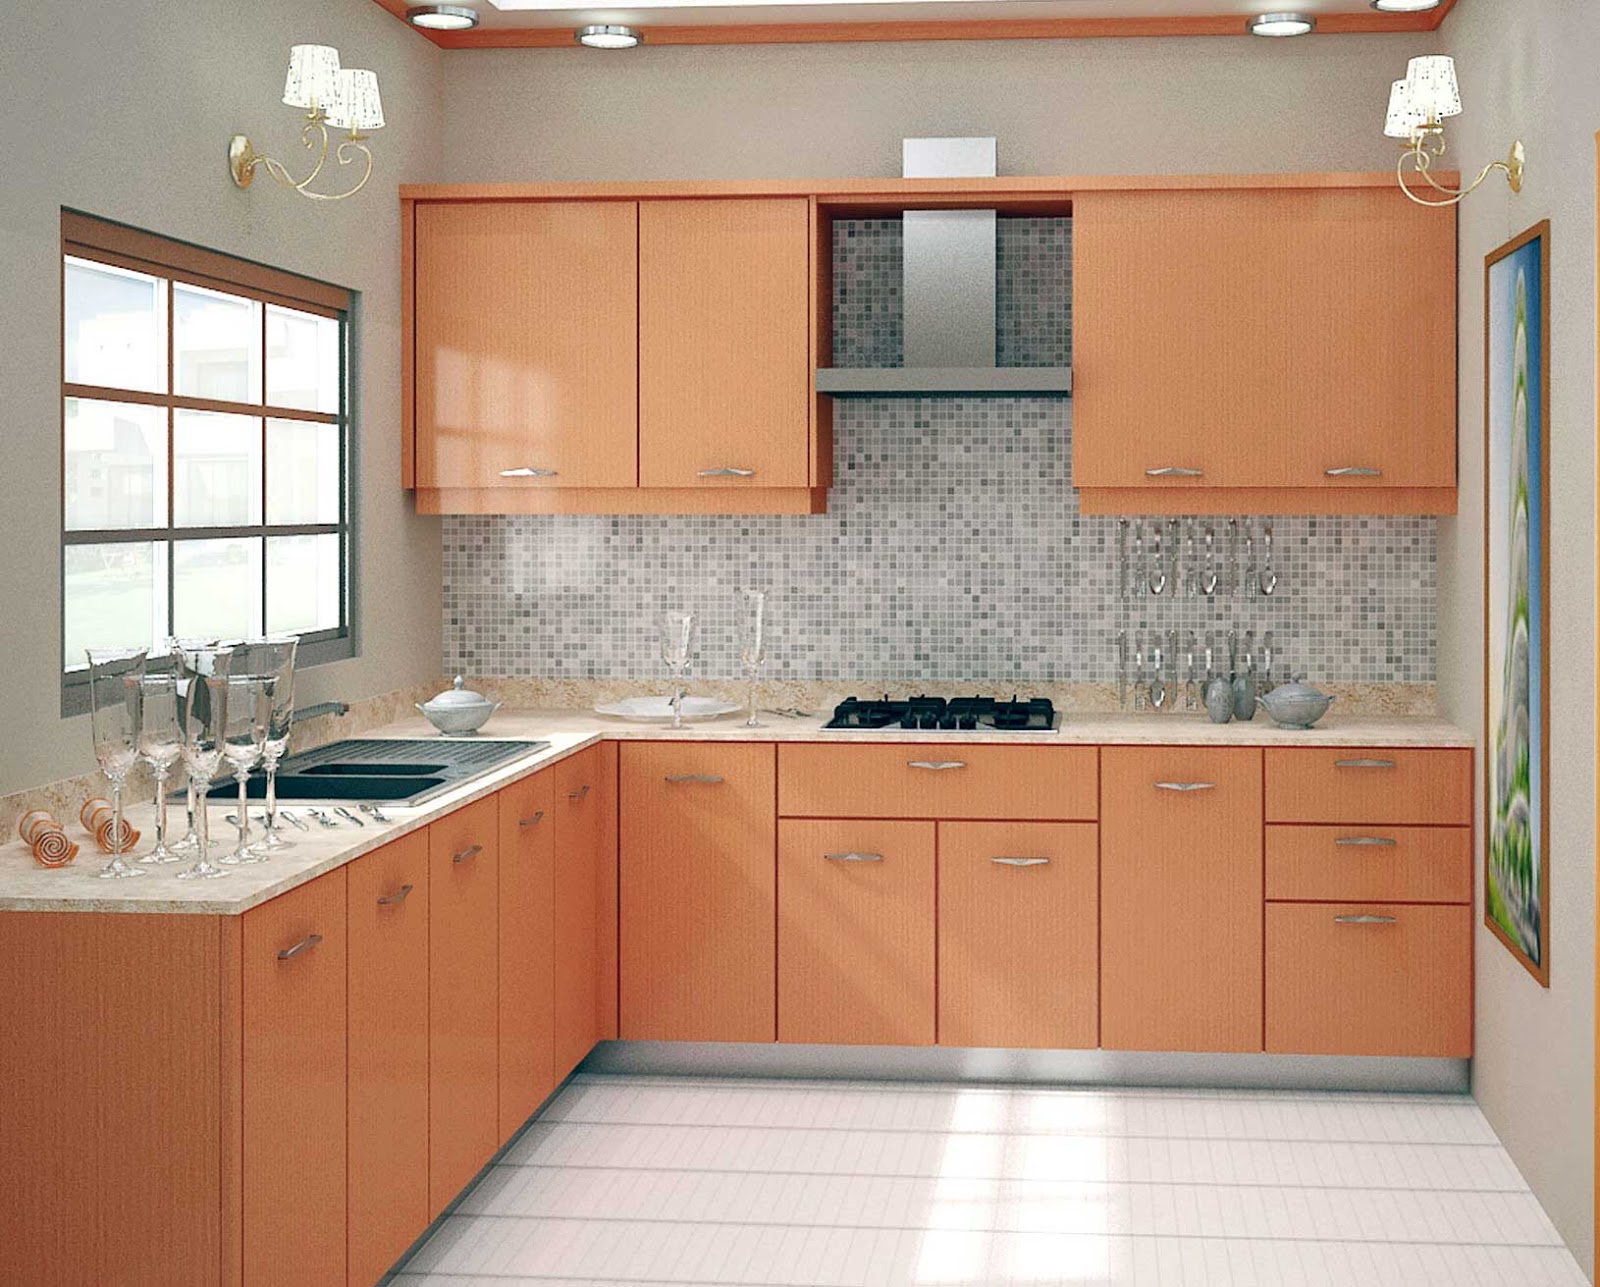 Best Of 55+ Impressive type of kitchen cabinet design You Won't Be Disappointed